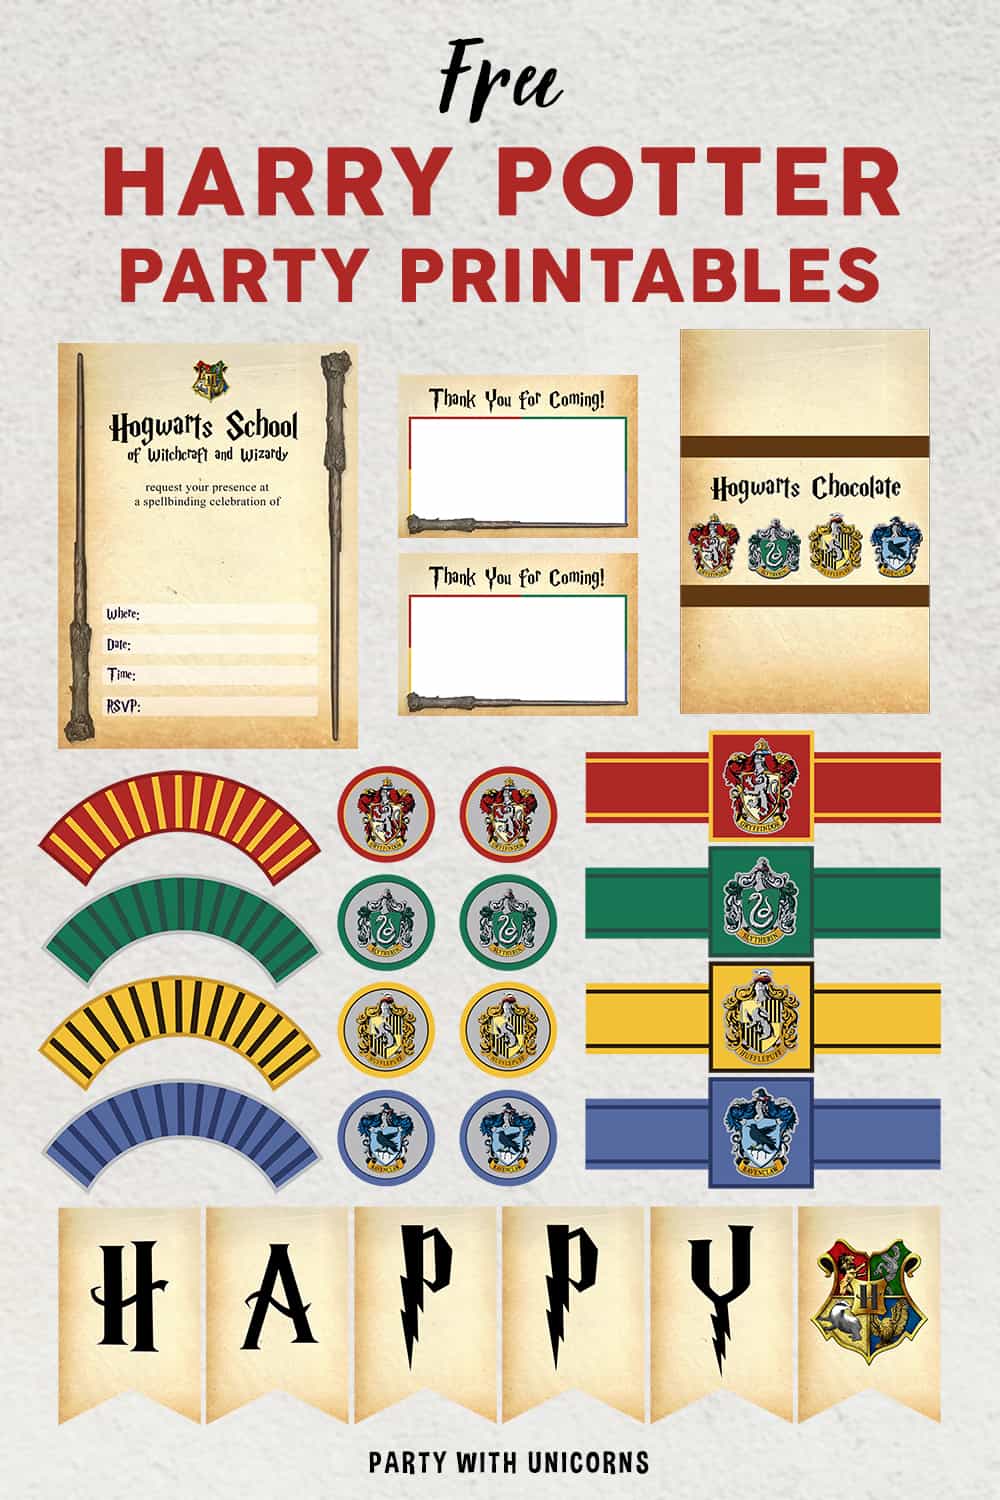 Included in Harry Potter party set